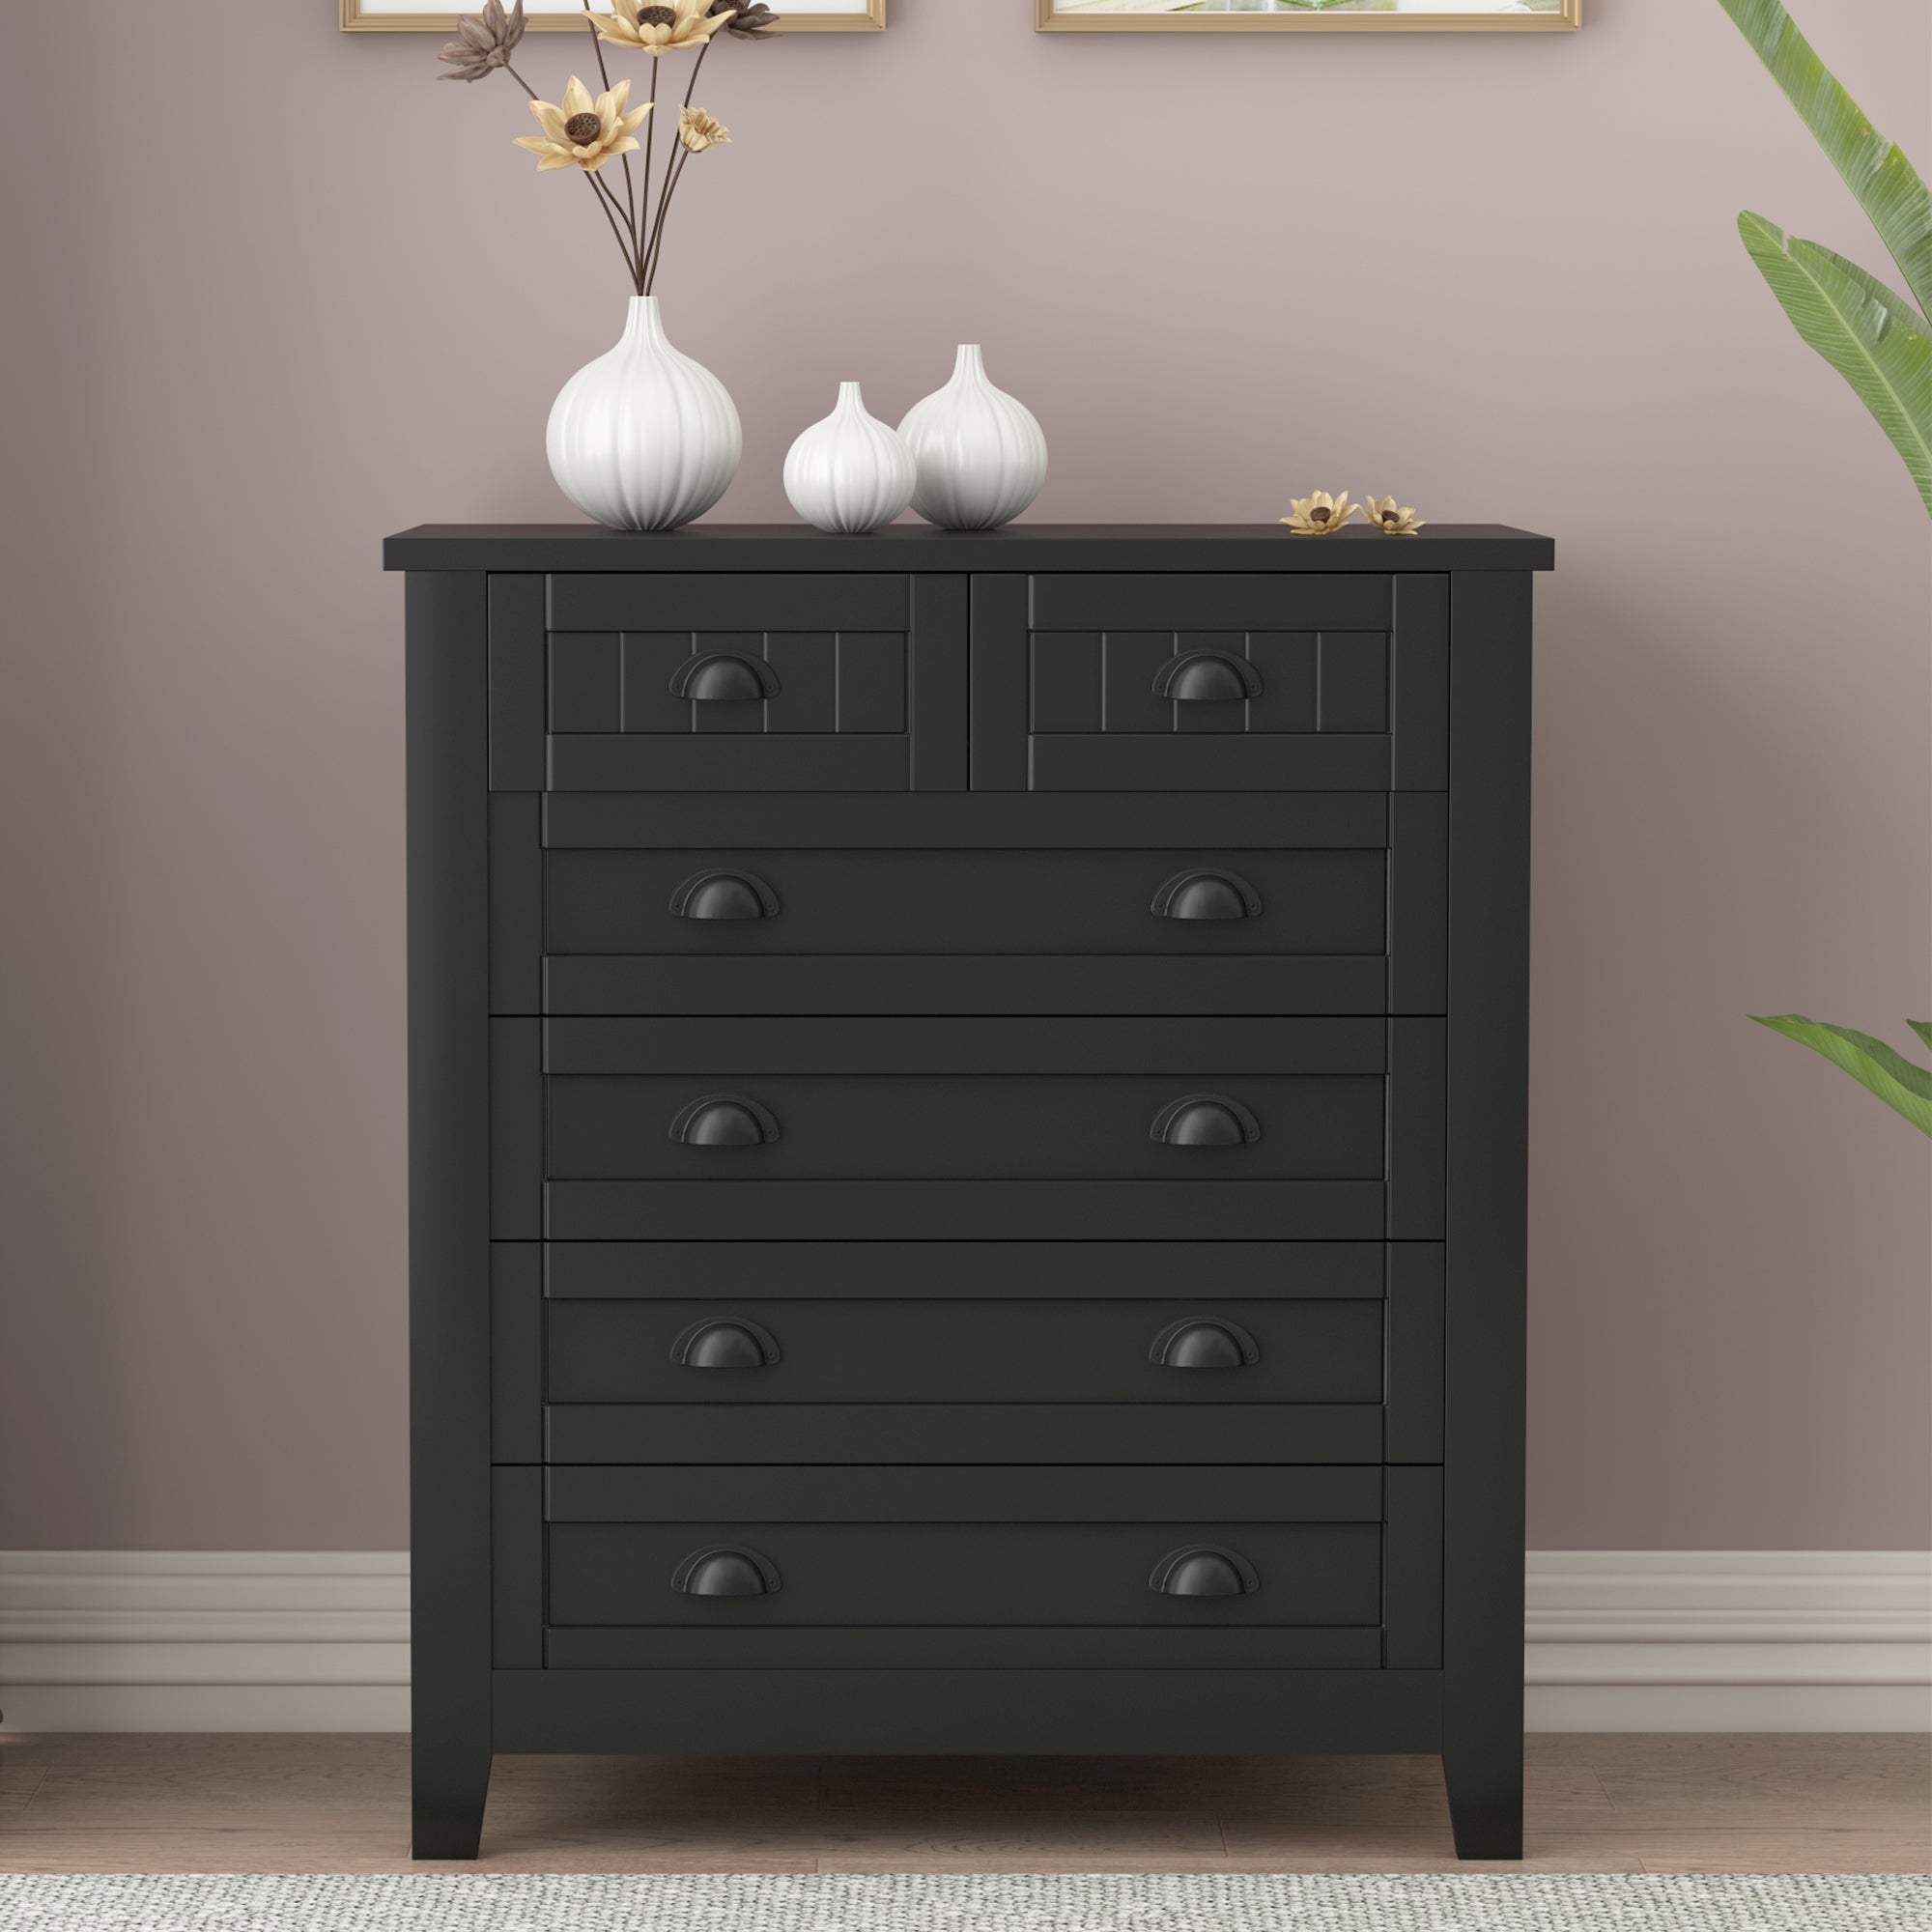 🆓🚛 Drawer Dresser Bar Cabinet Side Cabinet, Buffet Sideboard, Buffet Service Counter, Solid Wood Frame, Plasticdoor Panel, Retro Shell Handle, Applicable To Dining Room, Living Room, Kitchen, Corridor, Black